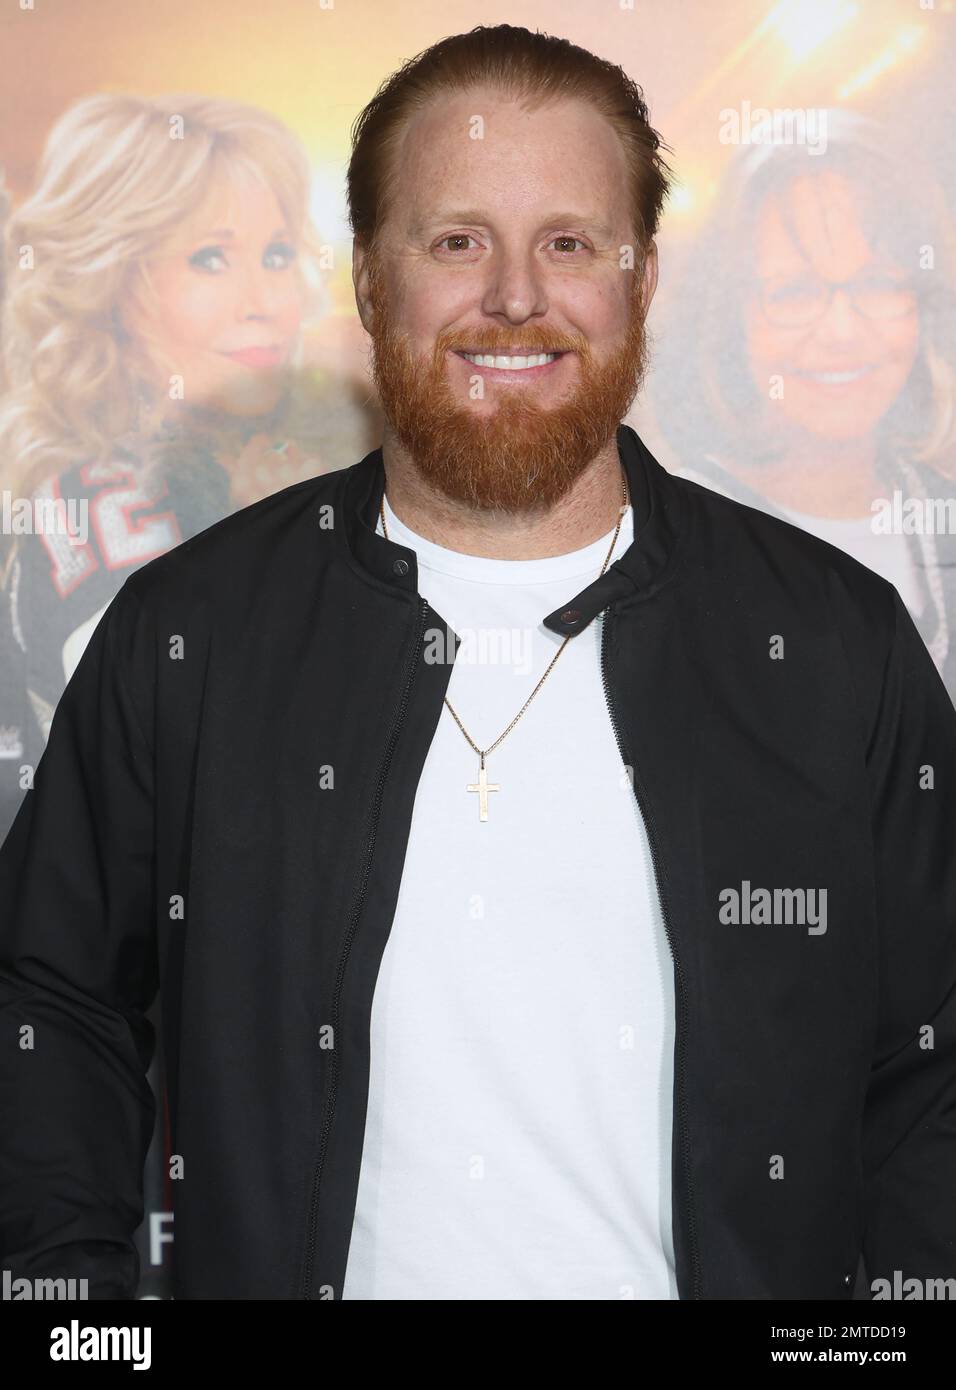 Los Angeles, Ca, USA. 23rd Aug, 2018. Justin Turner, Kourtney Turner,  attends 6th Annual PingPong4Purpose at Dodger Stadium on August 23, 2018 in  Los Angeles, California Credit: Faye Sadou/Media Punch/Alamy Live News